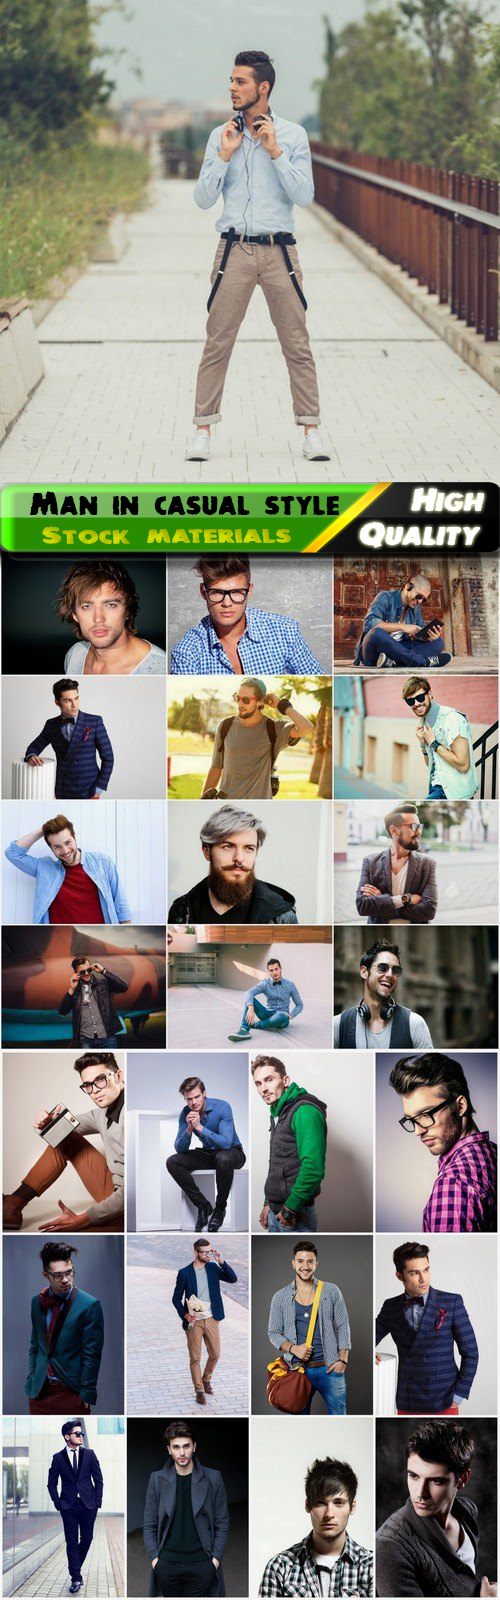 Stylish and fashionable man in casual style - 25 HQ Jpg